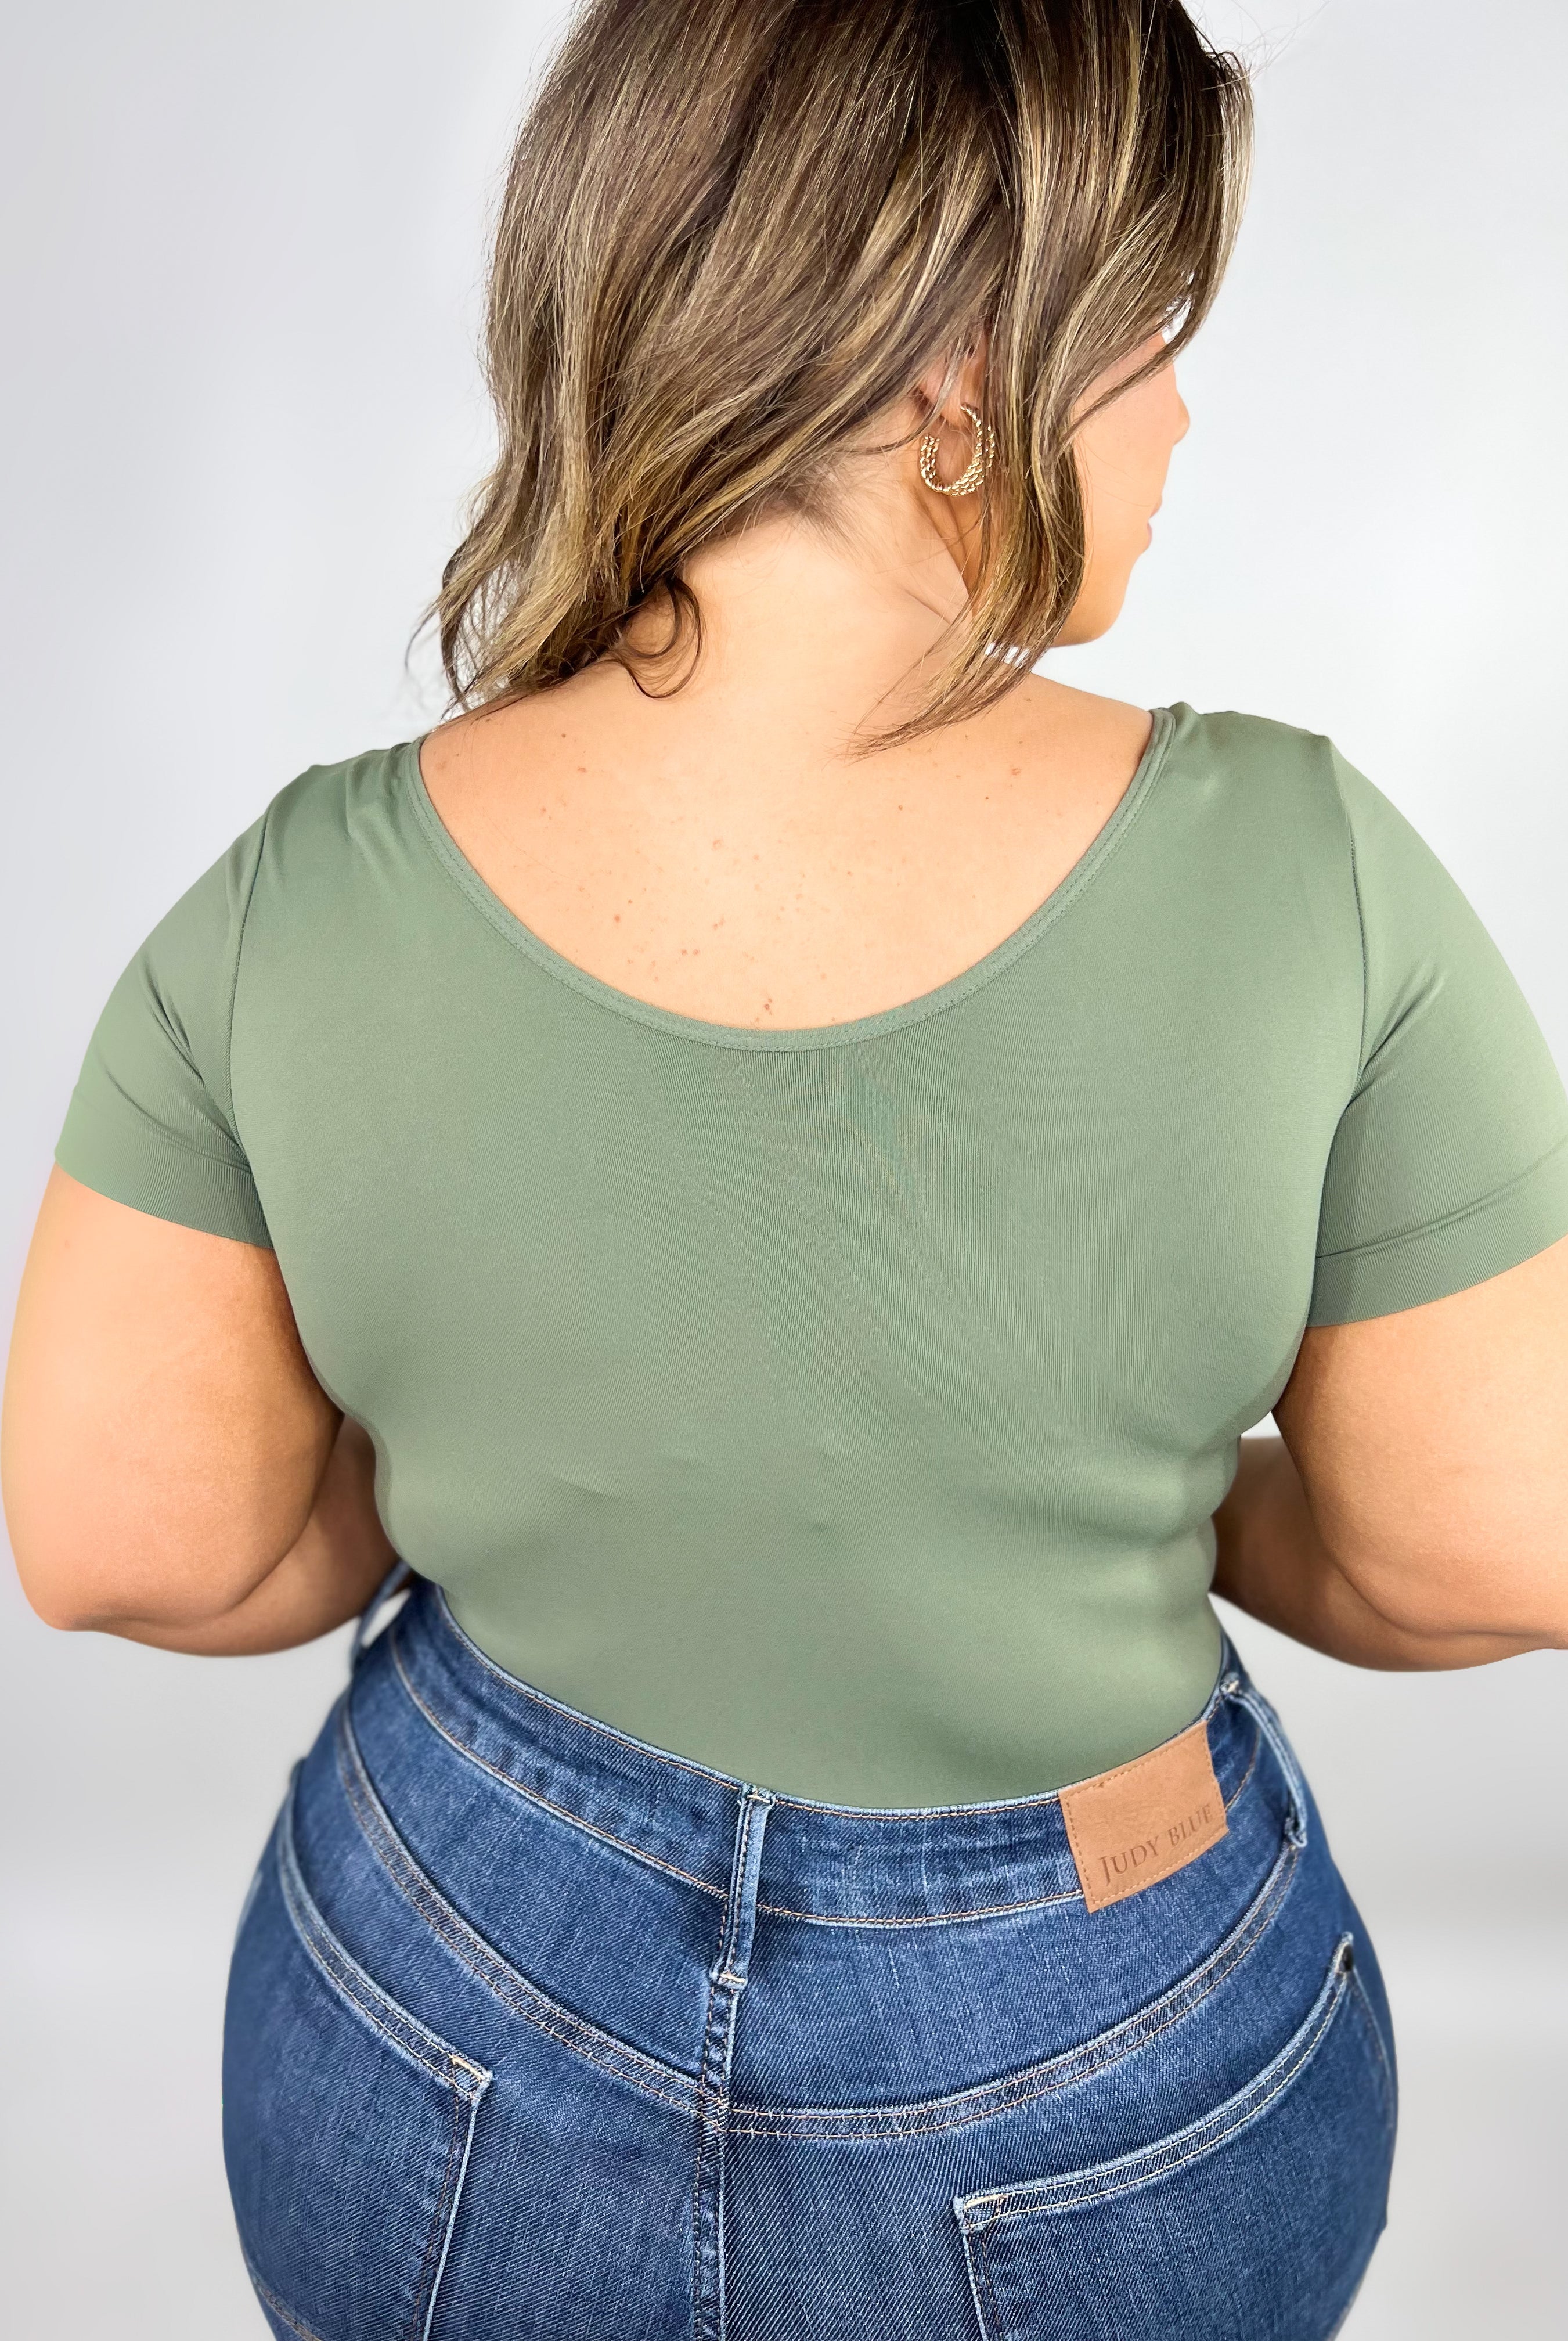 RESTOCK: Raelyn Reversible V-Neck Short Sleeve Top-110 Short Sleeve Top-YELETE-Heathered Boho Boutique, Women's Fashion and Accessories in Palmetto, FL